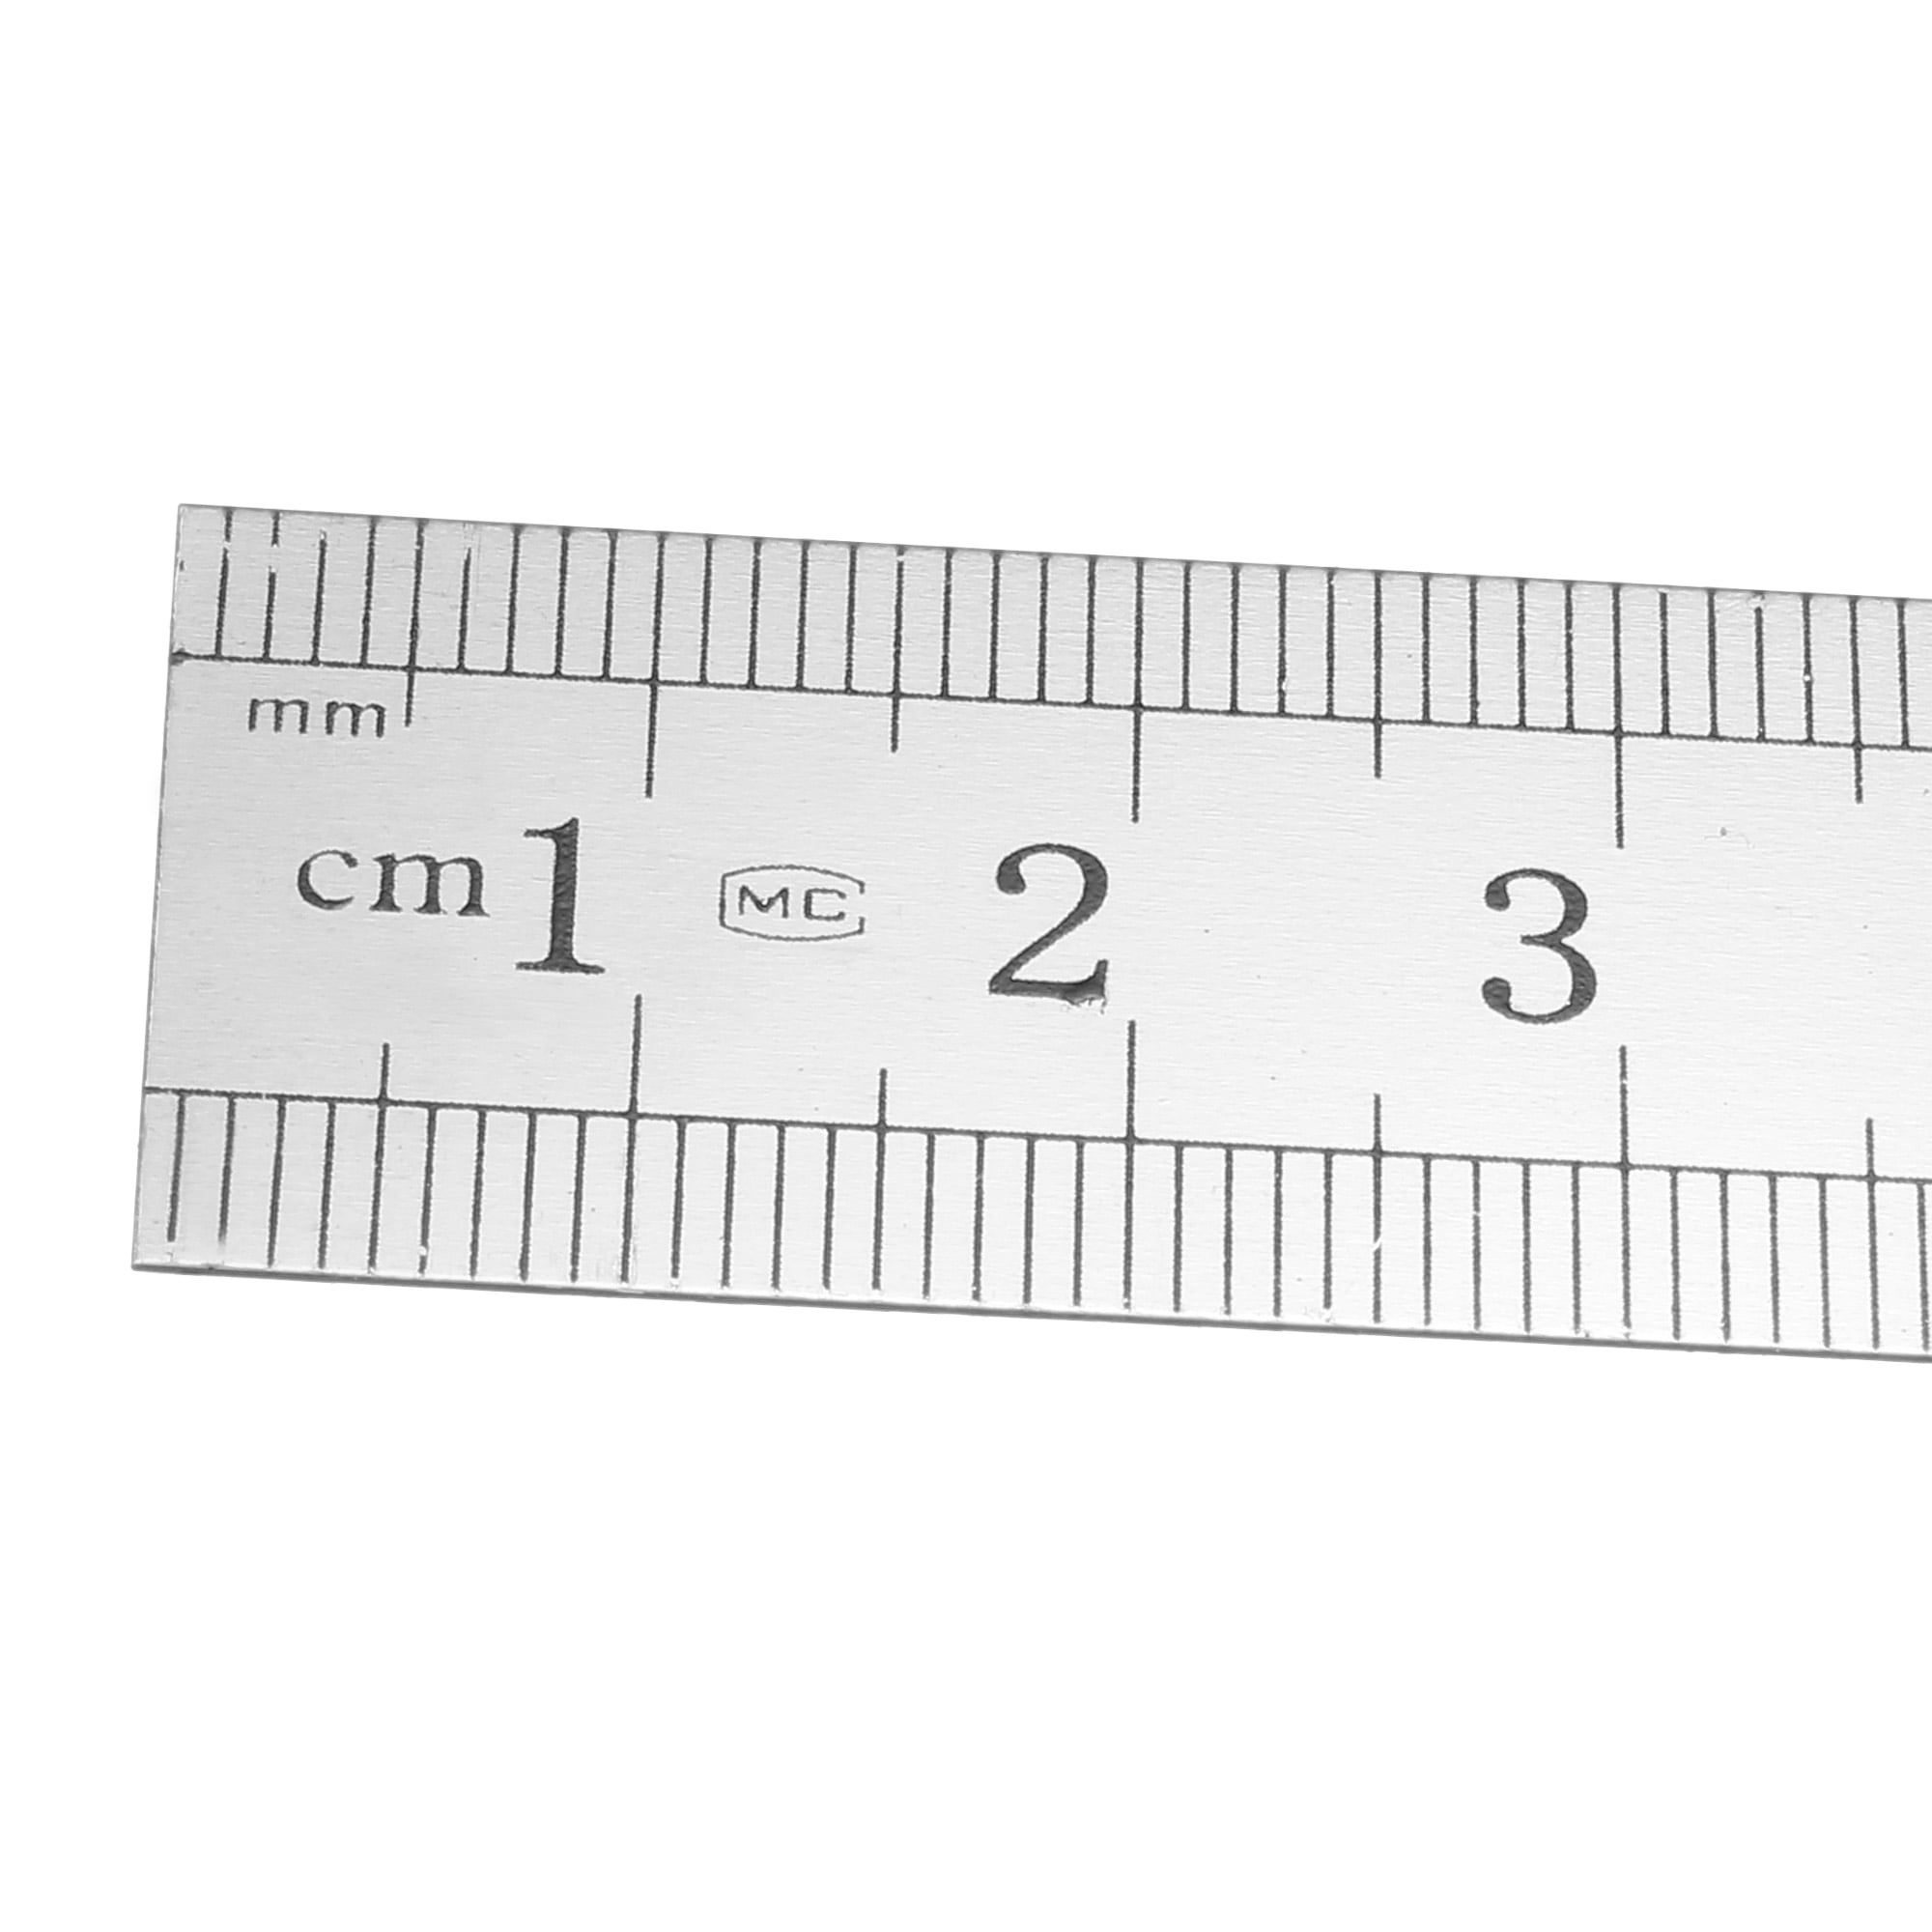 2pc 6 inch / 150mm Stainless Steel Rulers